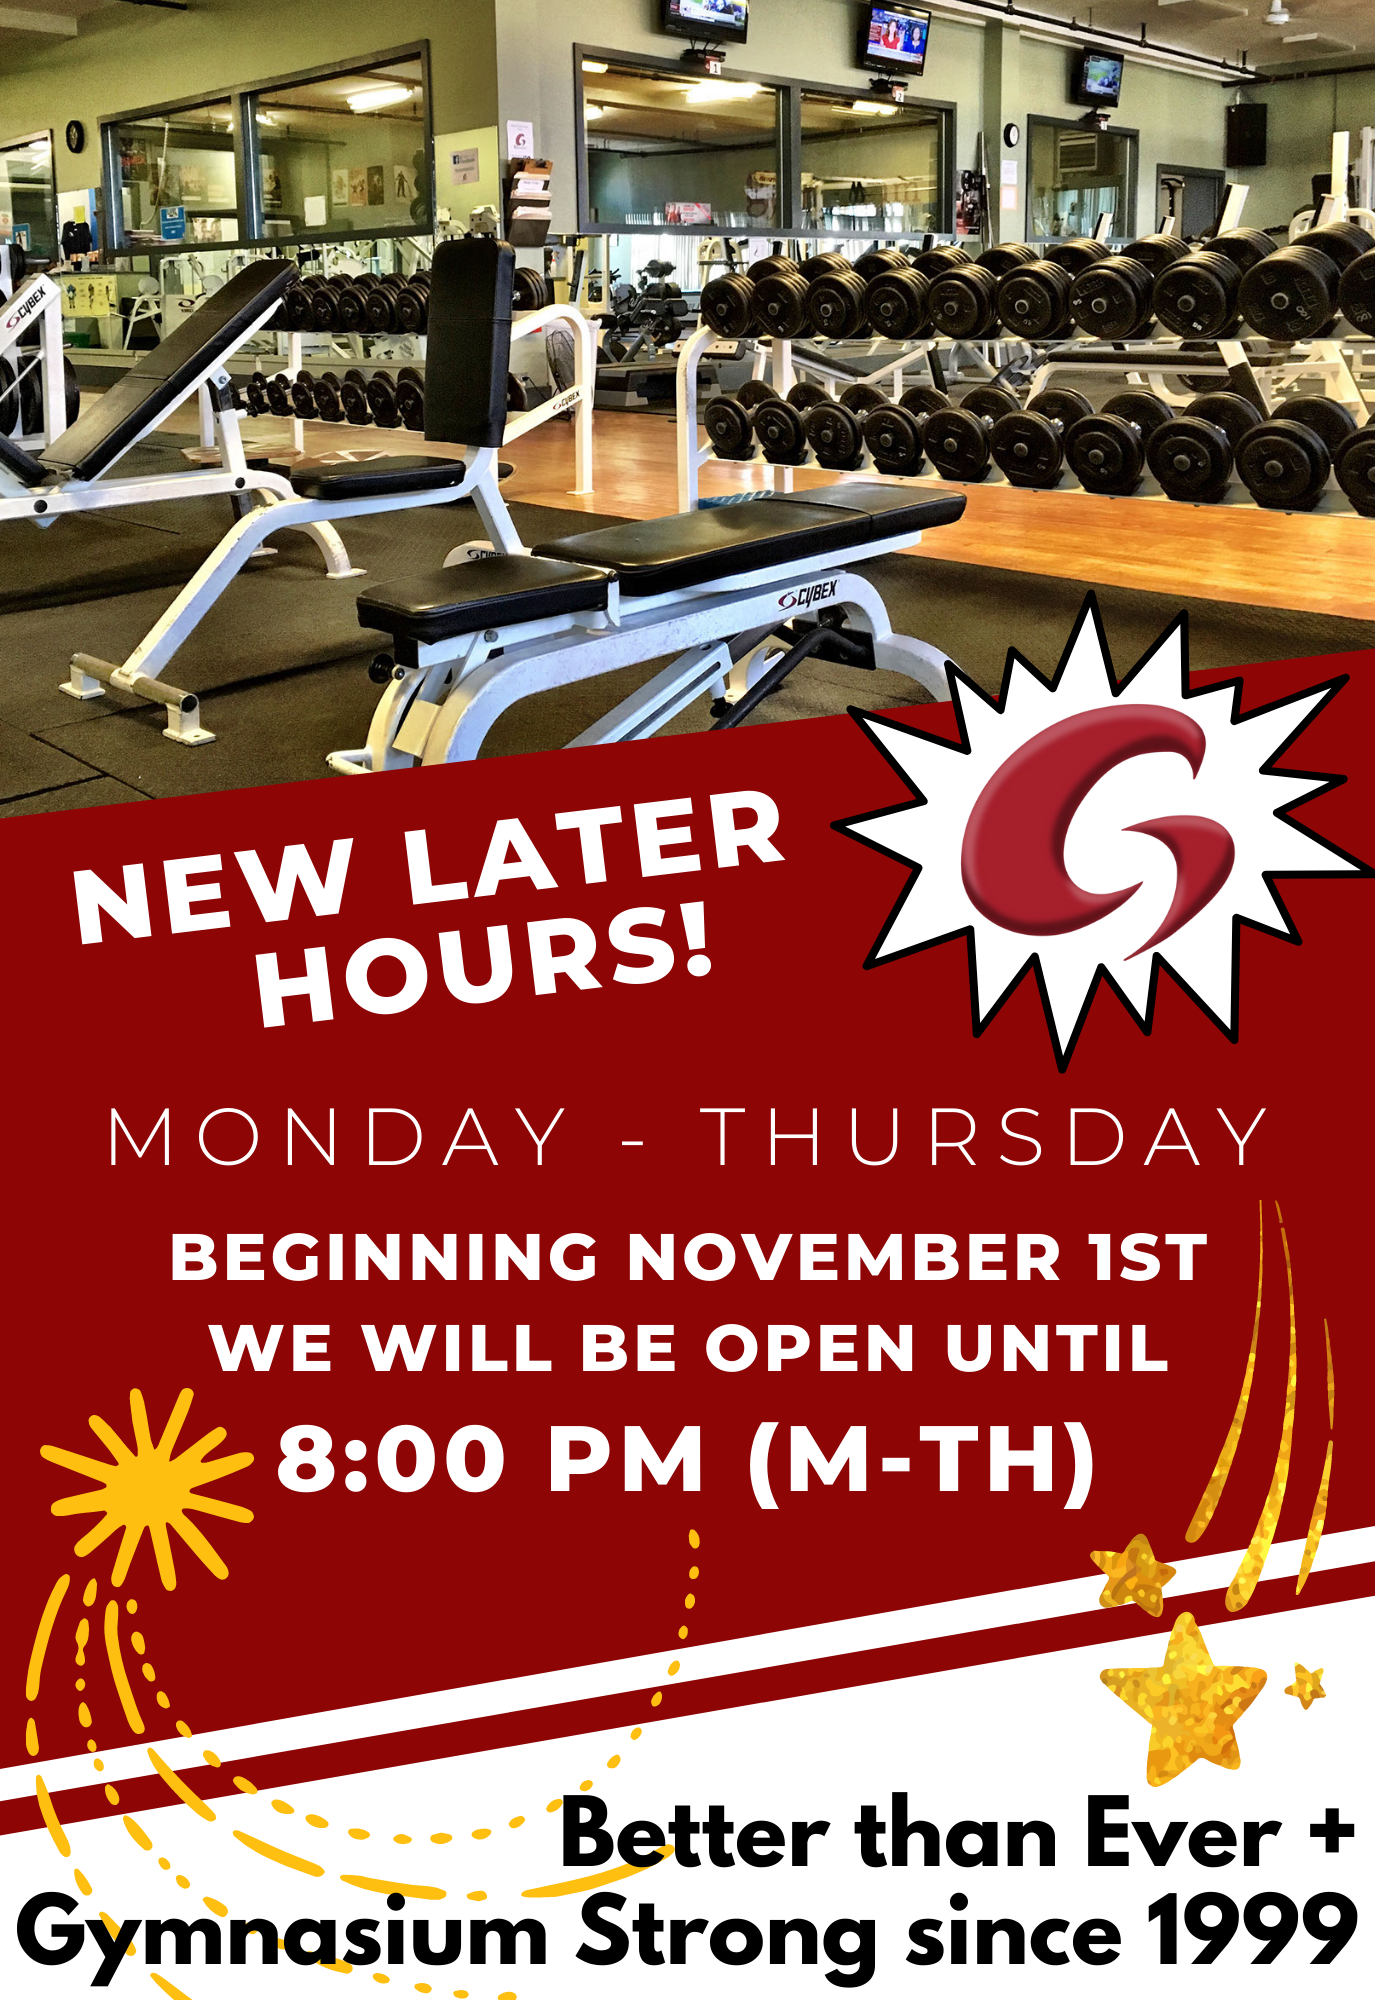 Gym Open Later Hours (11 x 16 in)